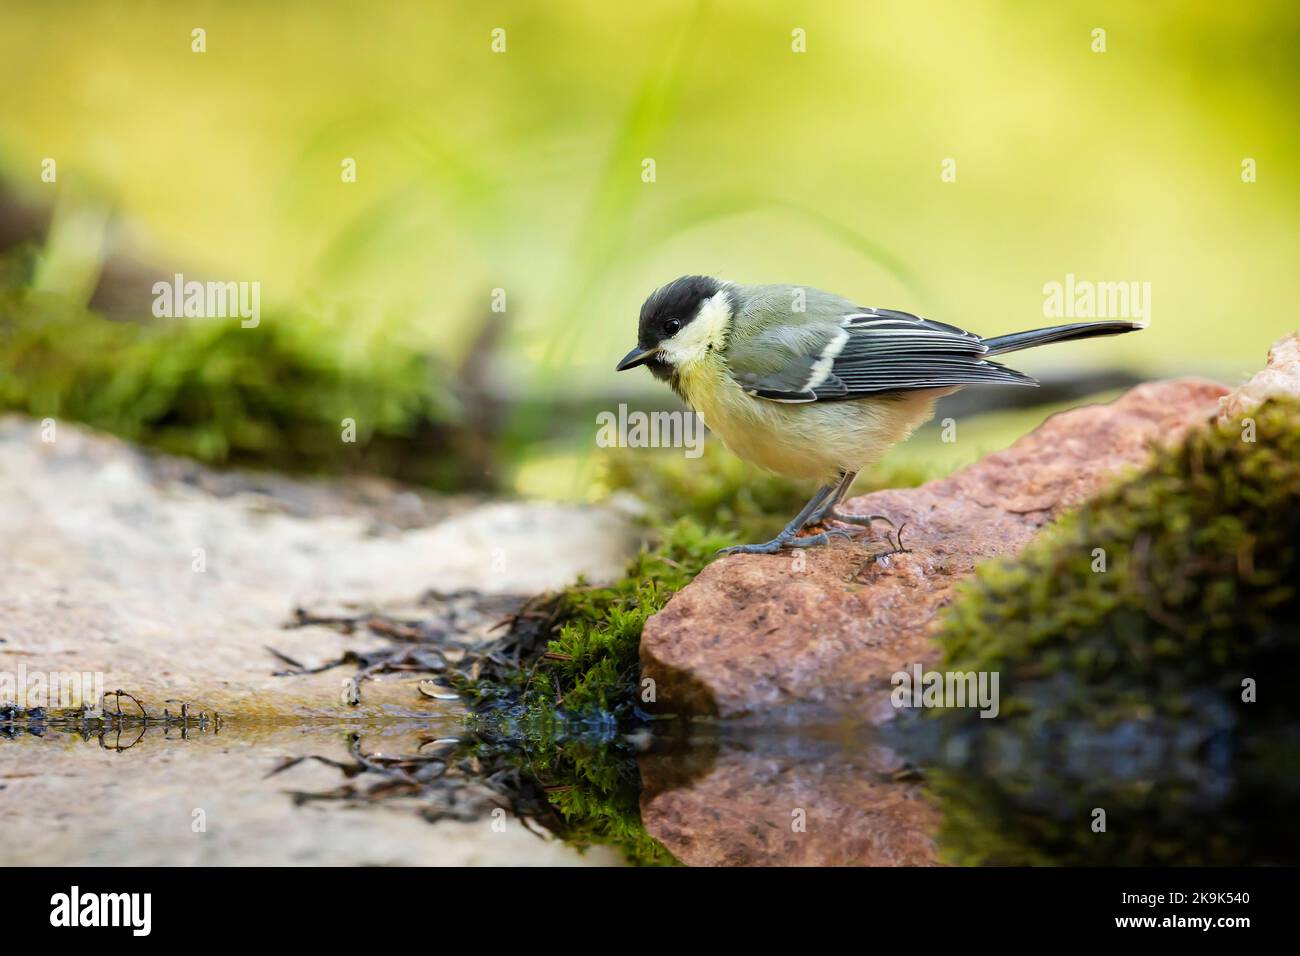 Great tit Parus major. Garden bird, perched on a stone with moss near the water in forest pond Stock Photo